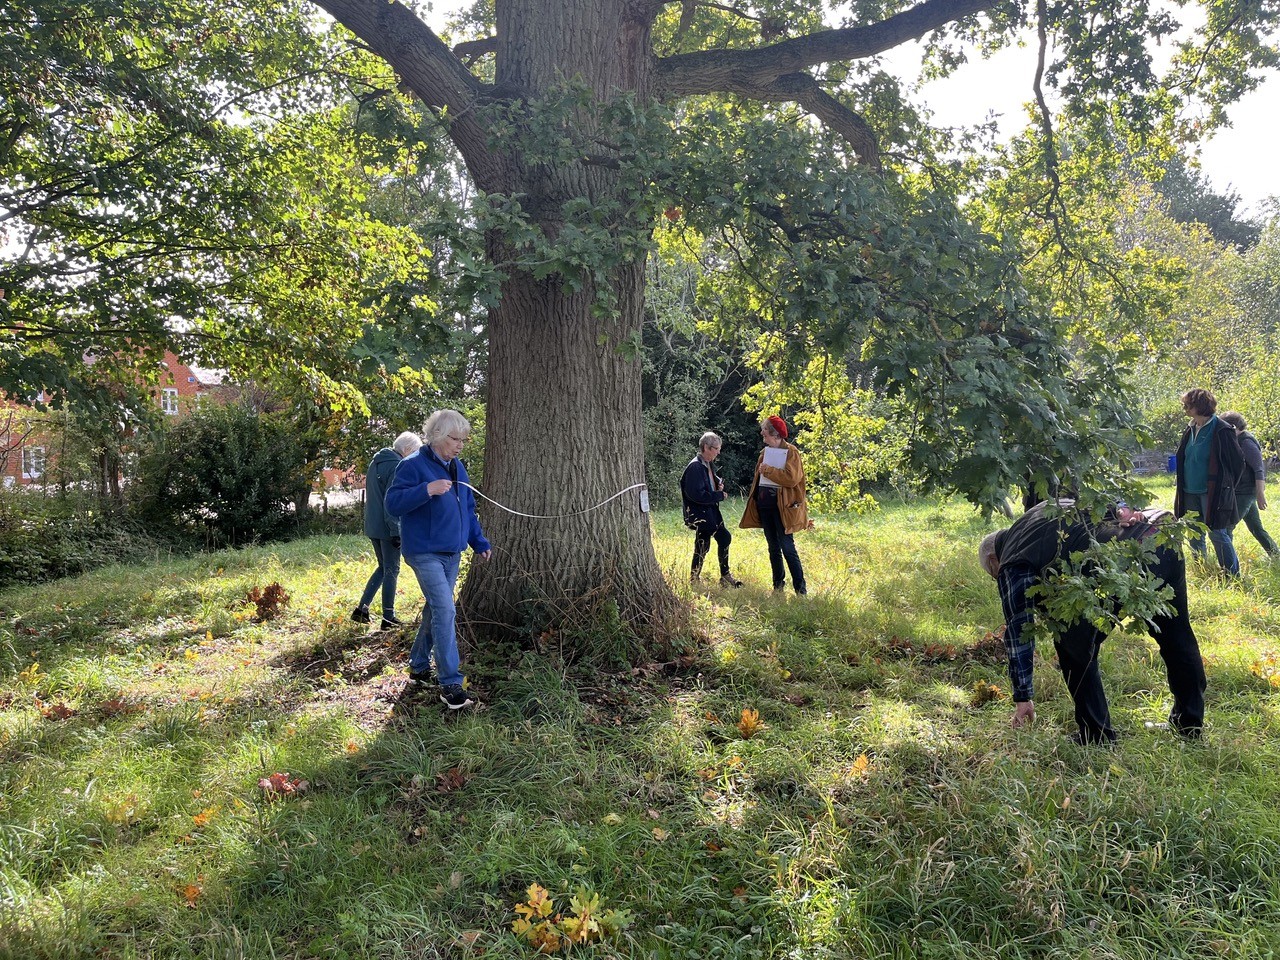 Measuring the girth of the Peace Oak to determine its age, although we know that it was planted to commemorate the end of …